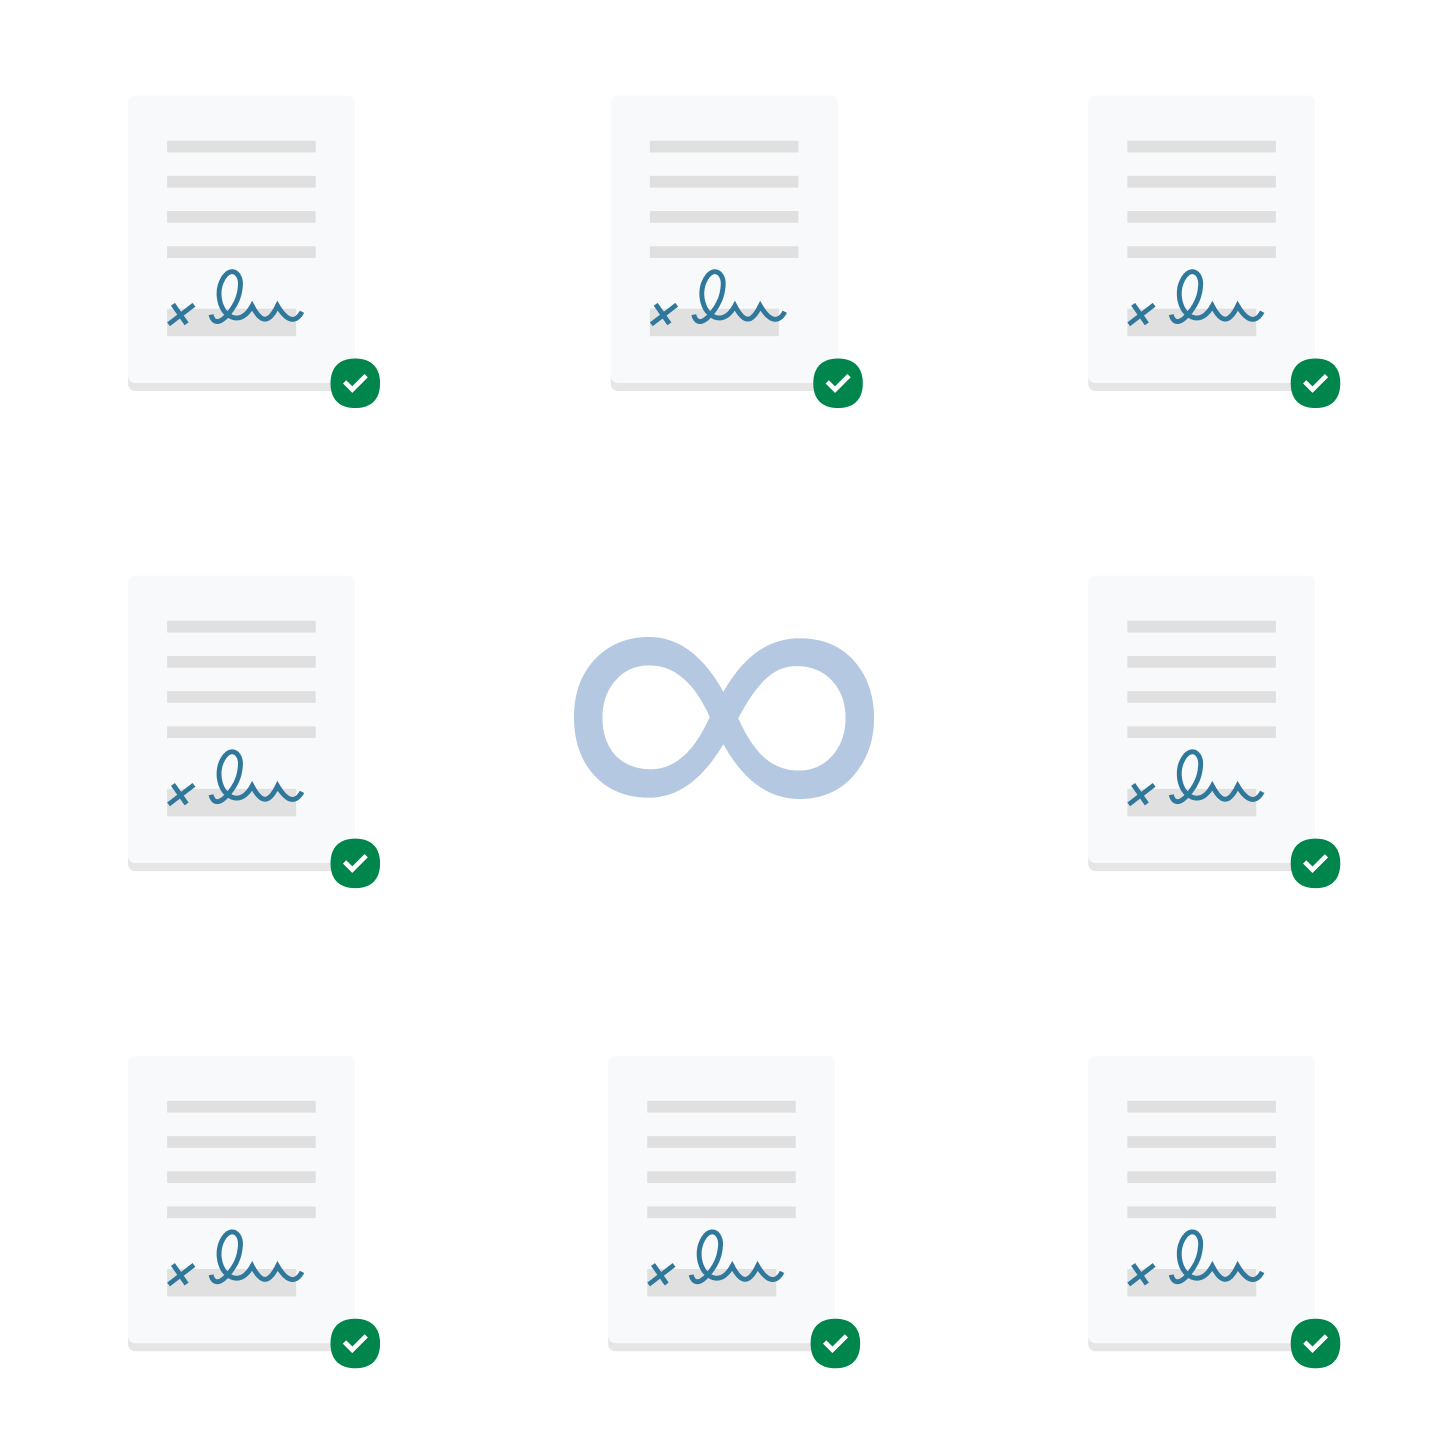 A grid of signed documents surrounding an infinity loop symbol.